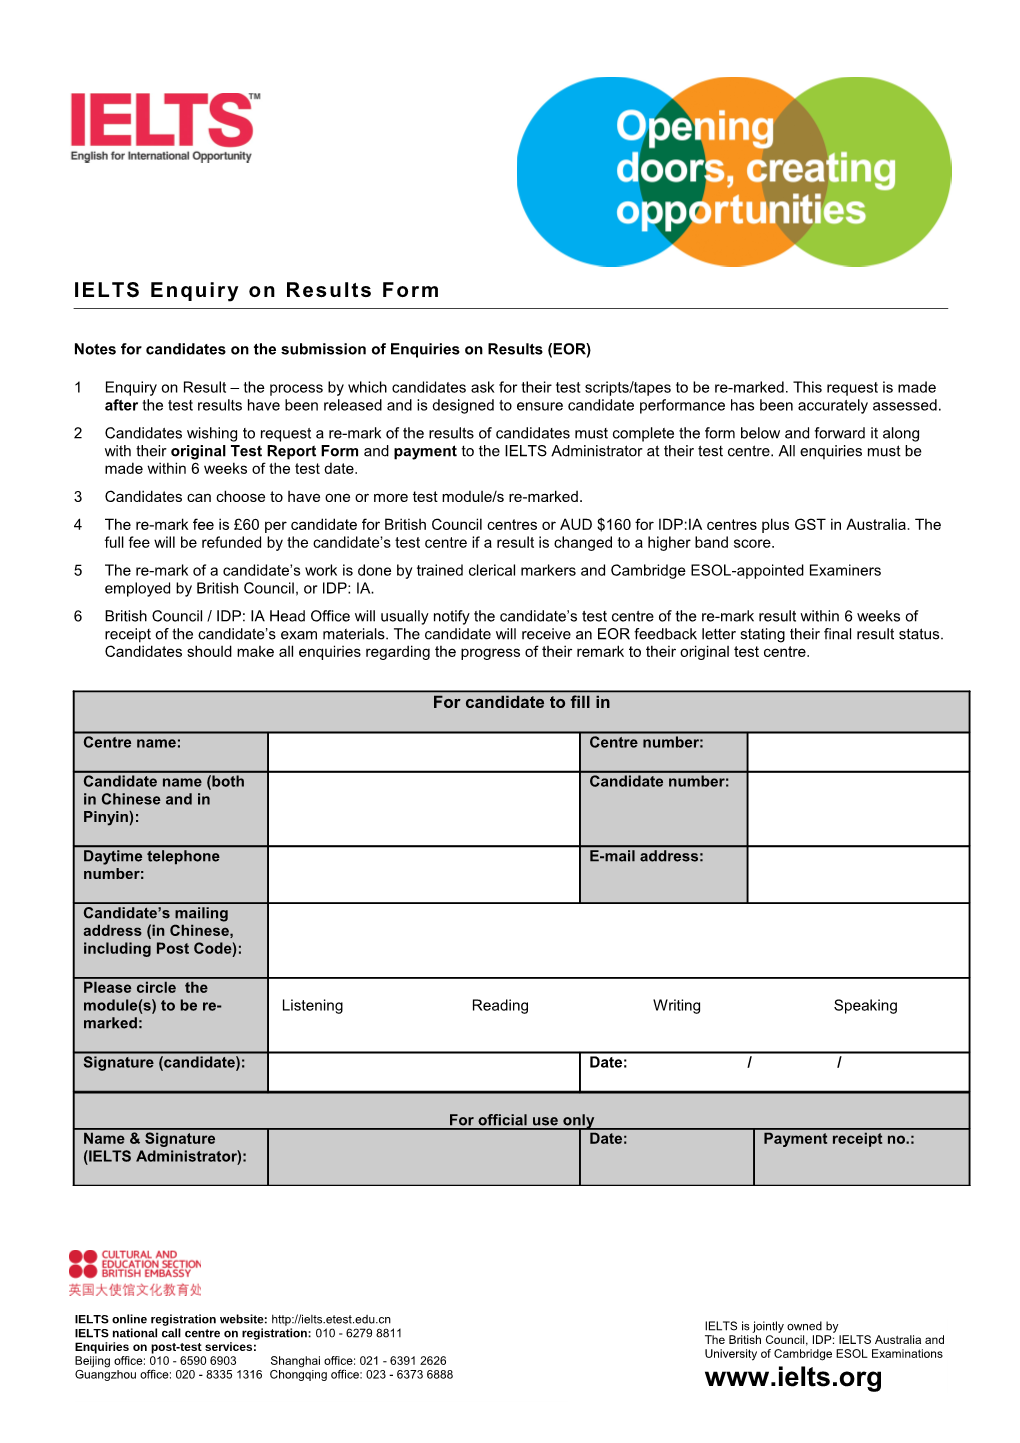 IELTS Enquiry on Results Form s1